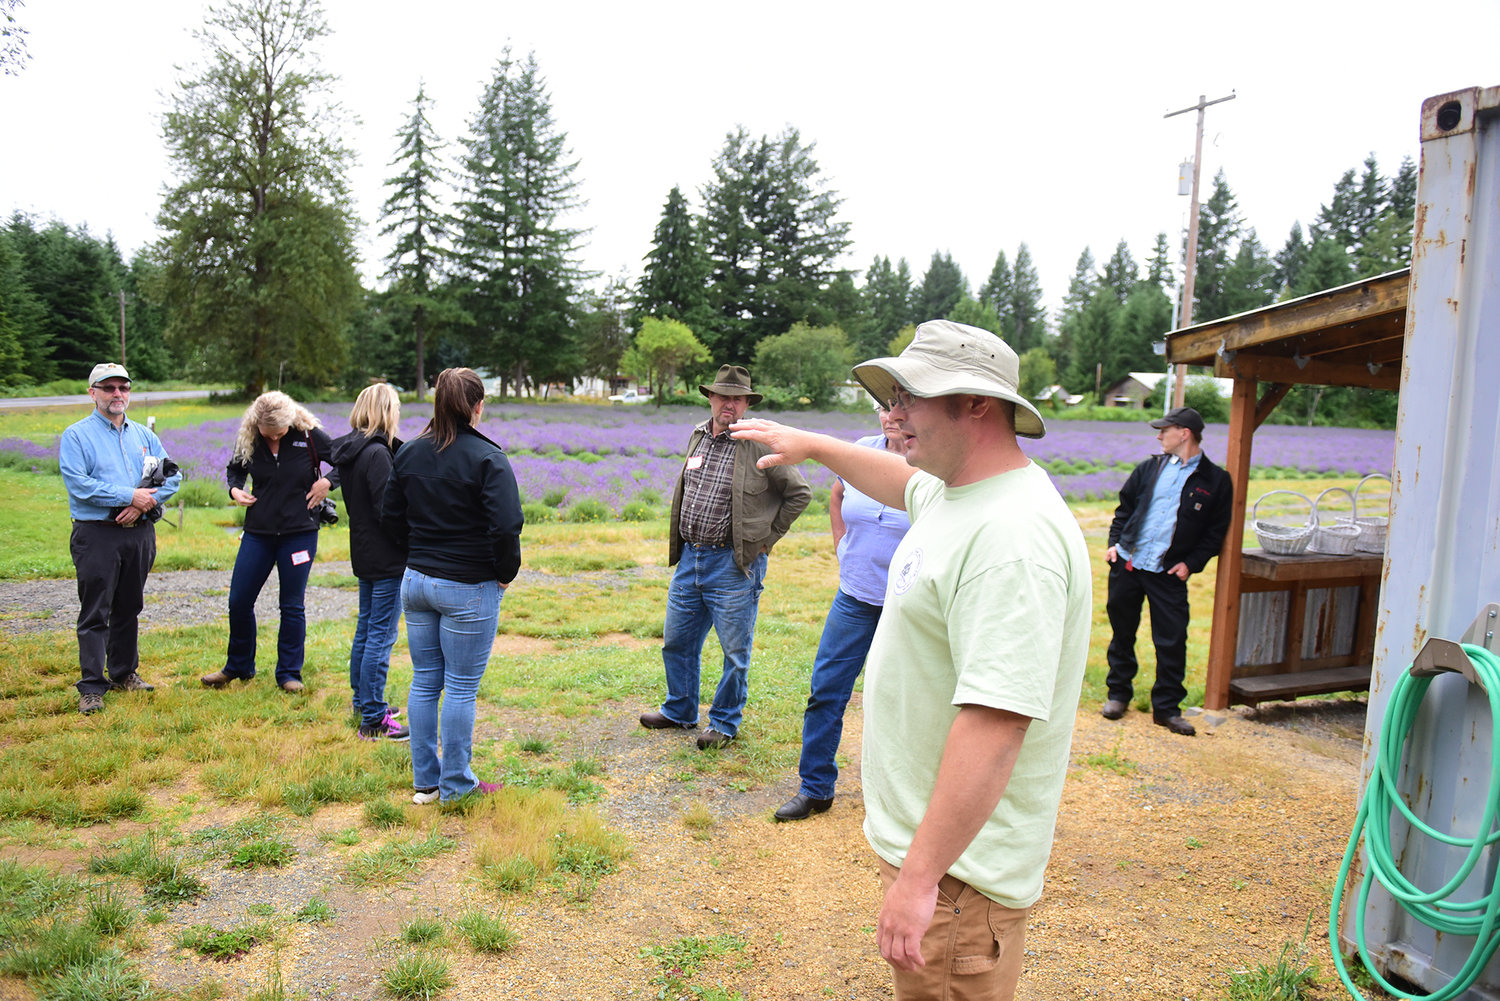 Justin Claibourn, co-owner of the Cowlitz Falls Lavender Company, talks to regional leaders about his operation and the challenges he faces during the Lewis County Farm Bureau Tour of Ag Wednesday afternoon.